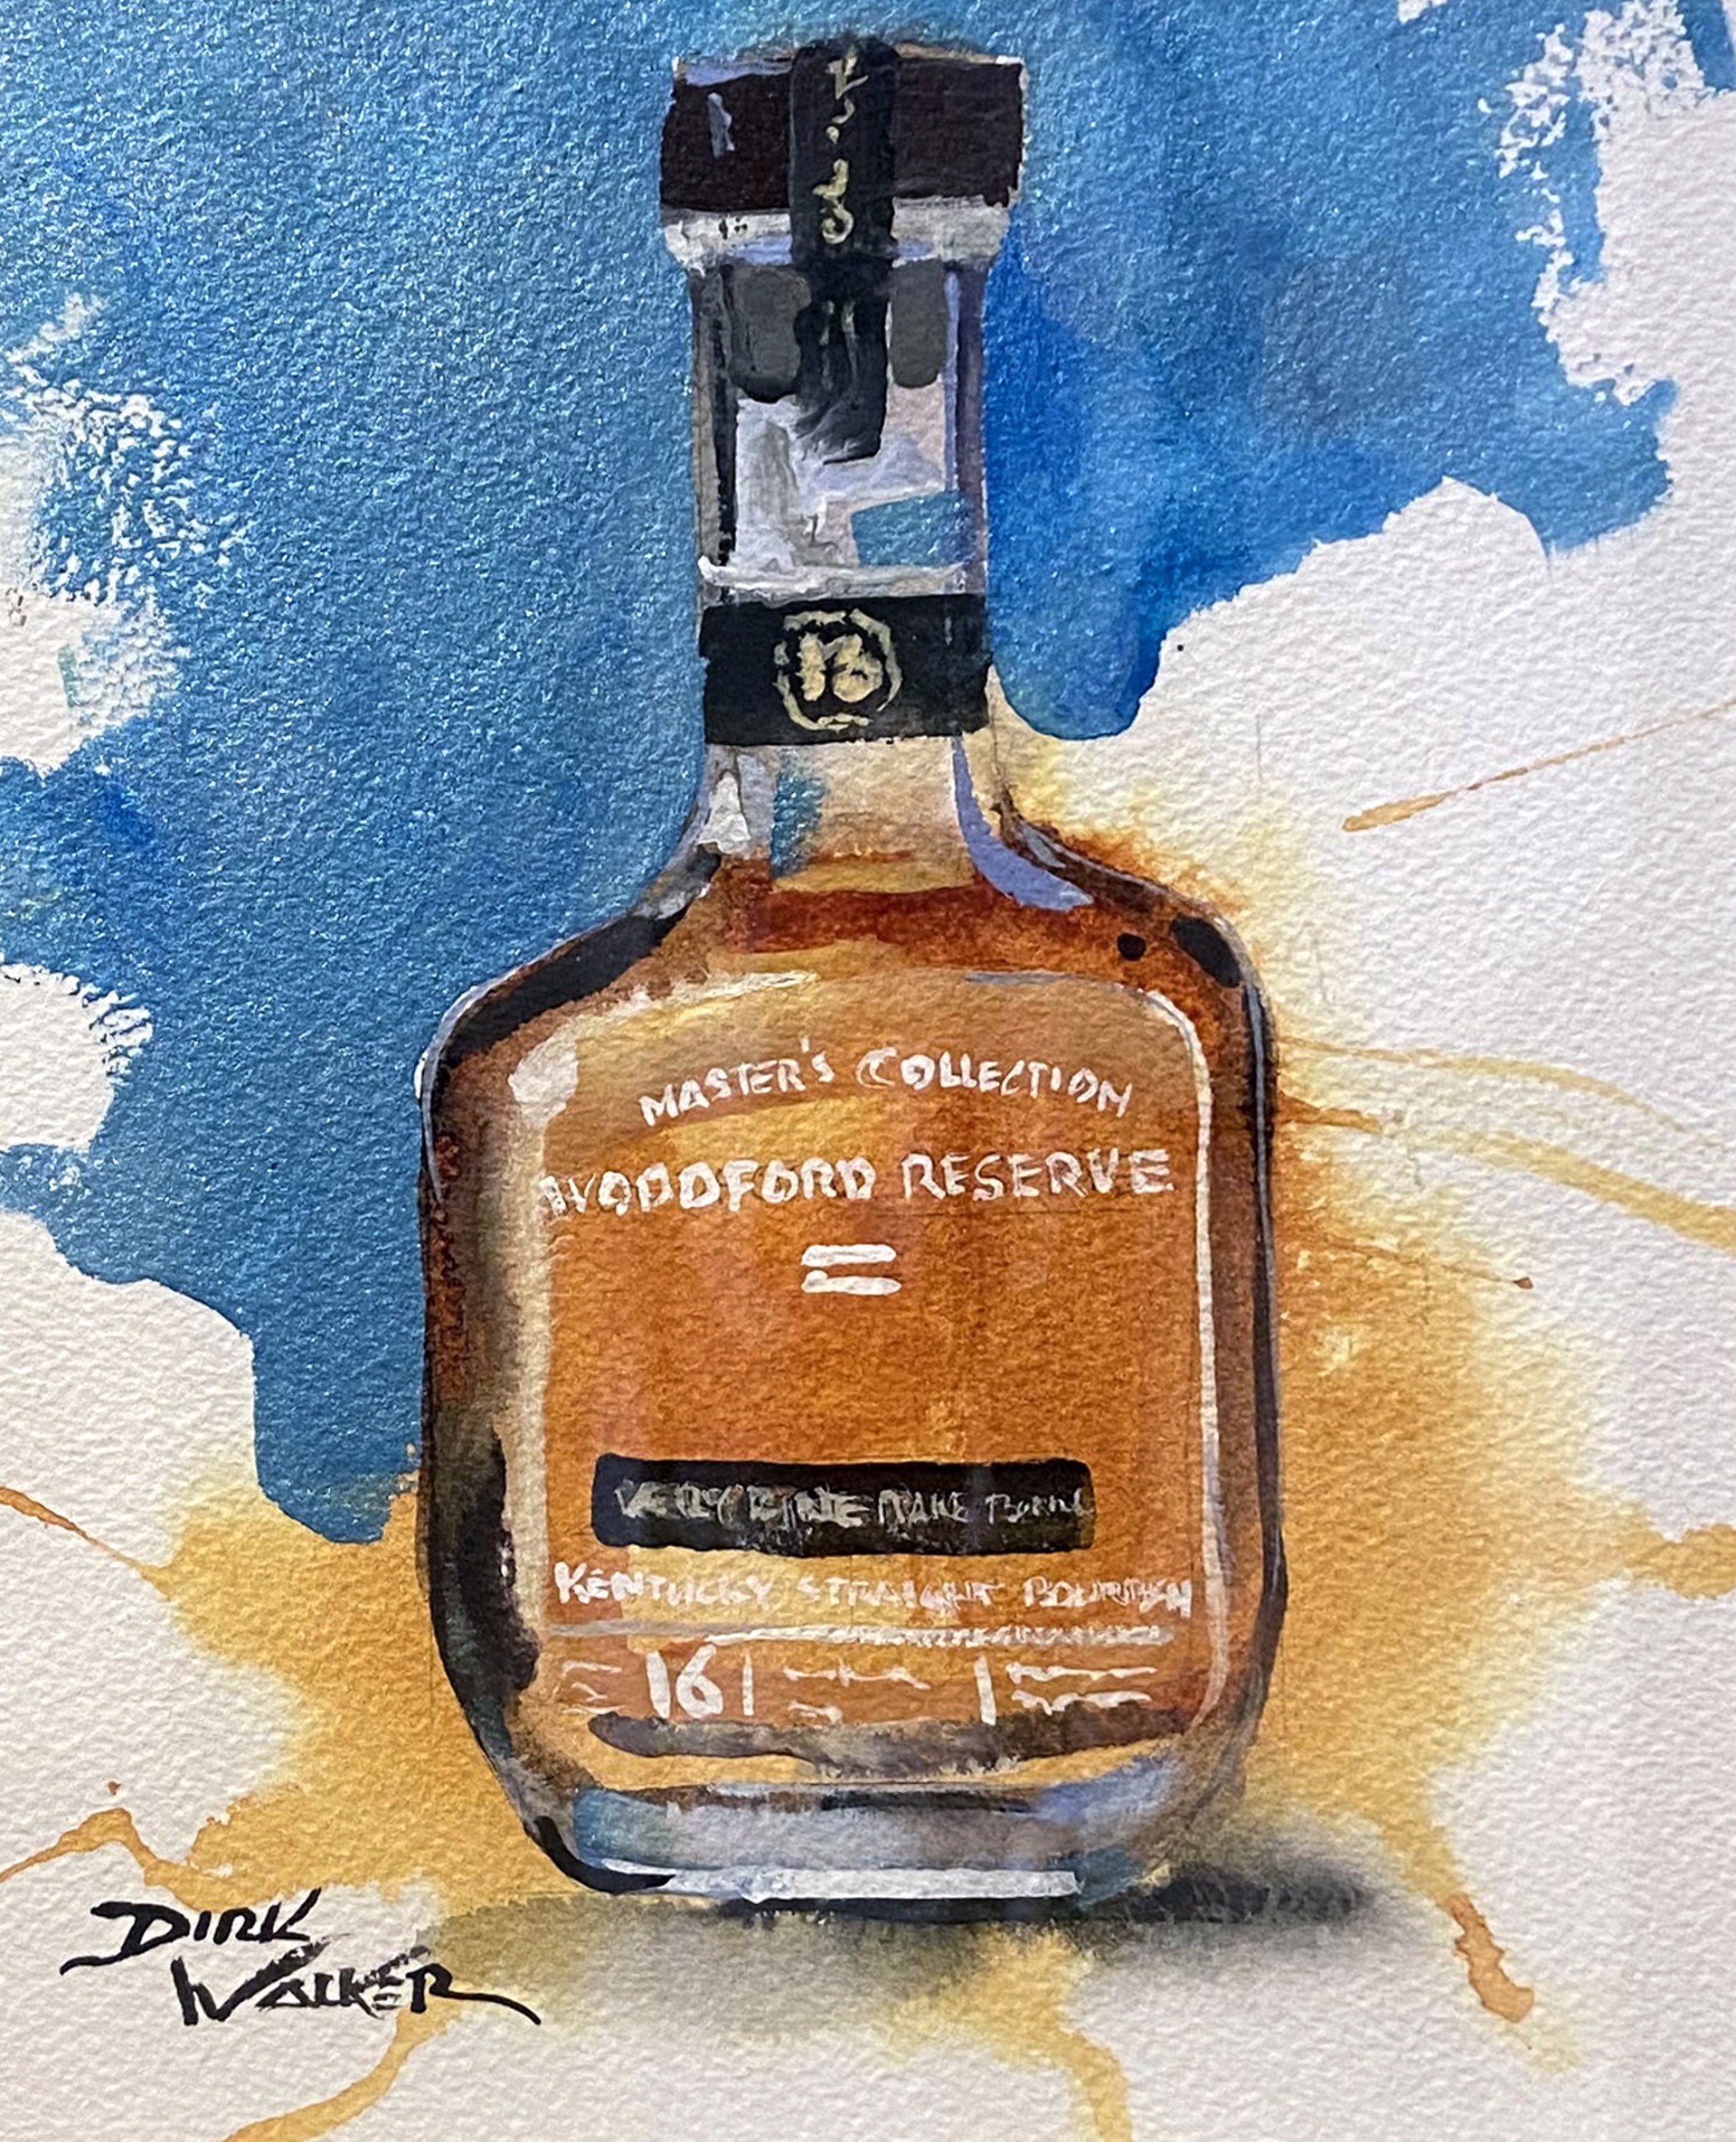 Woodford Reserve - Masters Collection by Dirk Walker